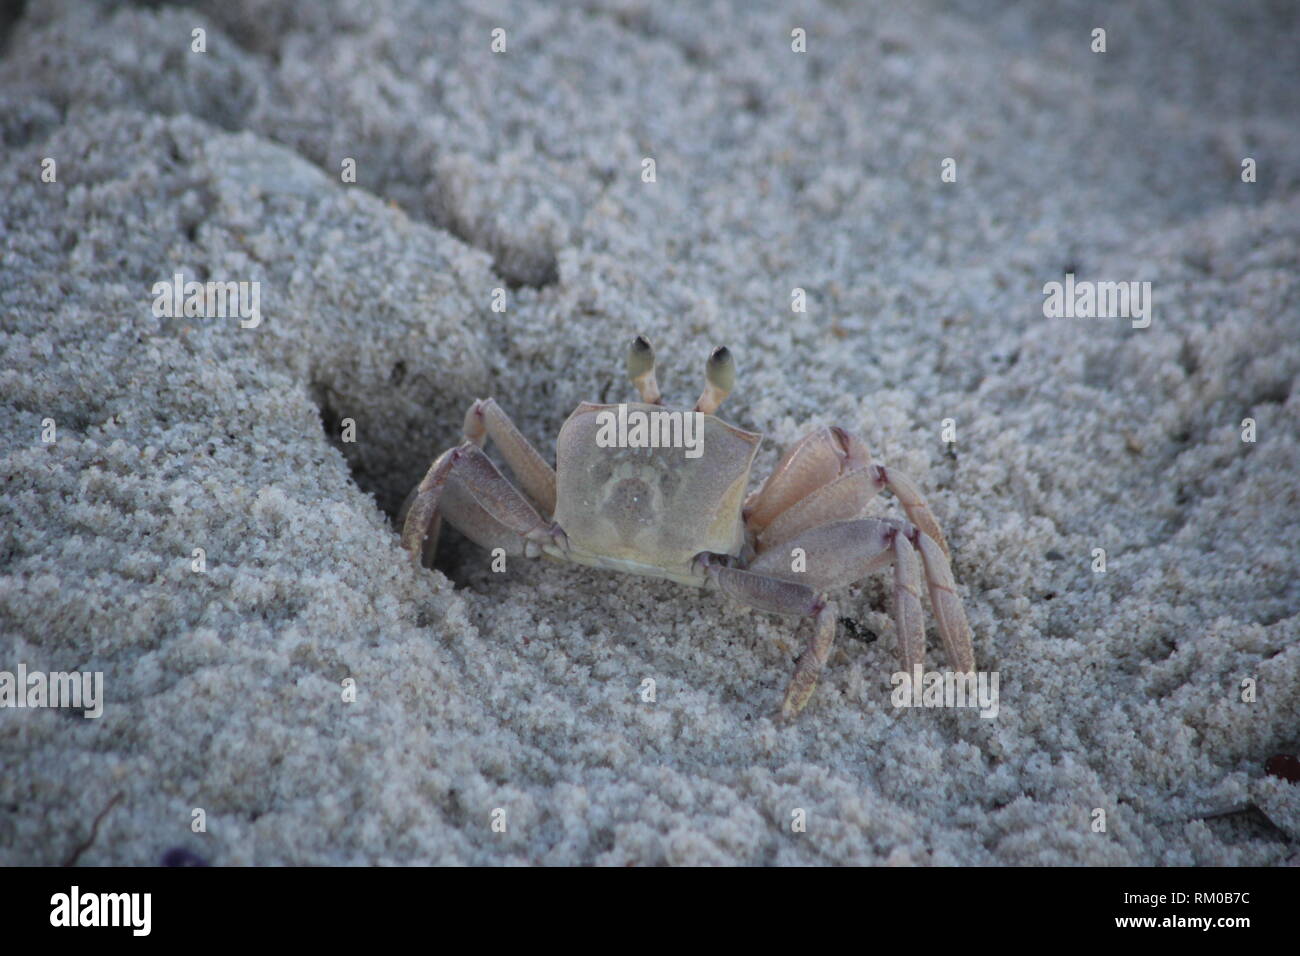 A Horned Ghost Crab (Ocypode ceratophthalma) digging in the sands of Diani Beach, Kenya. Stock Photo